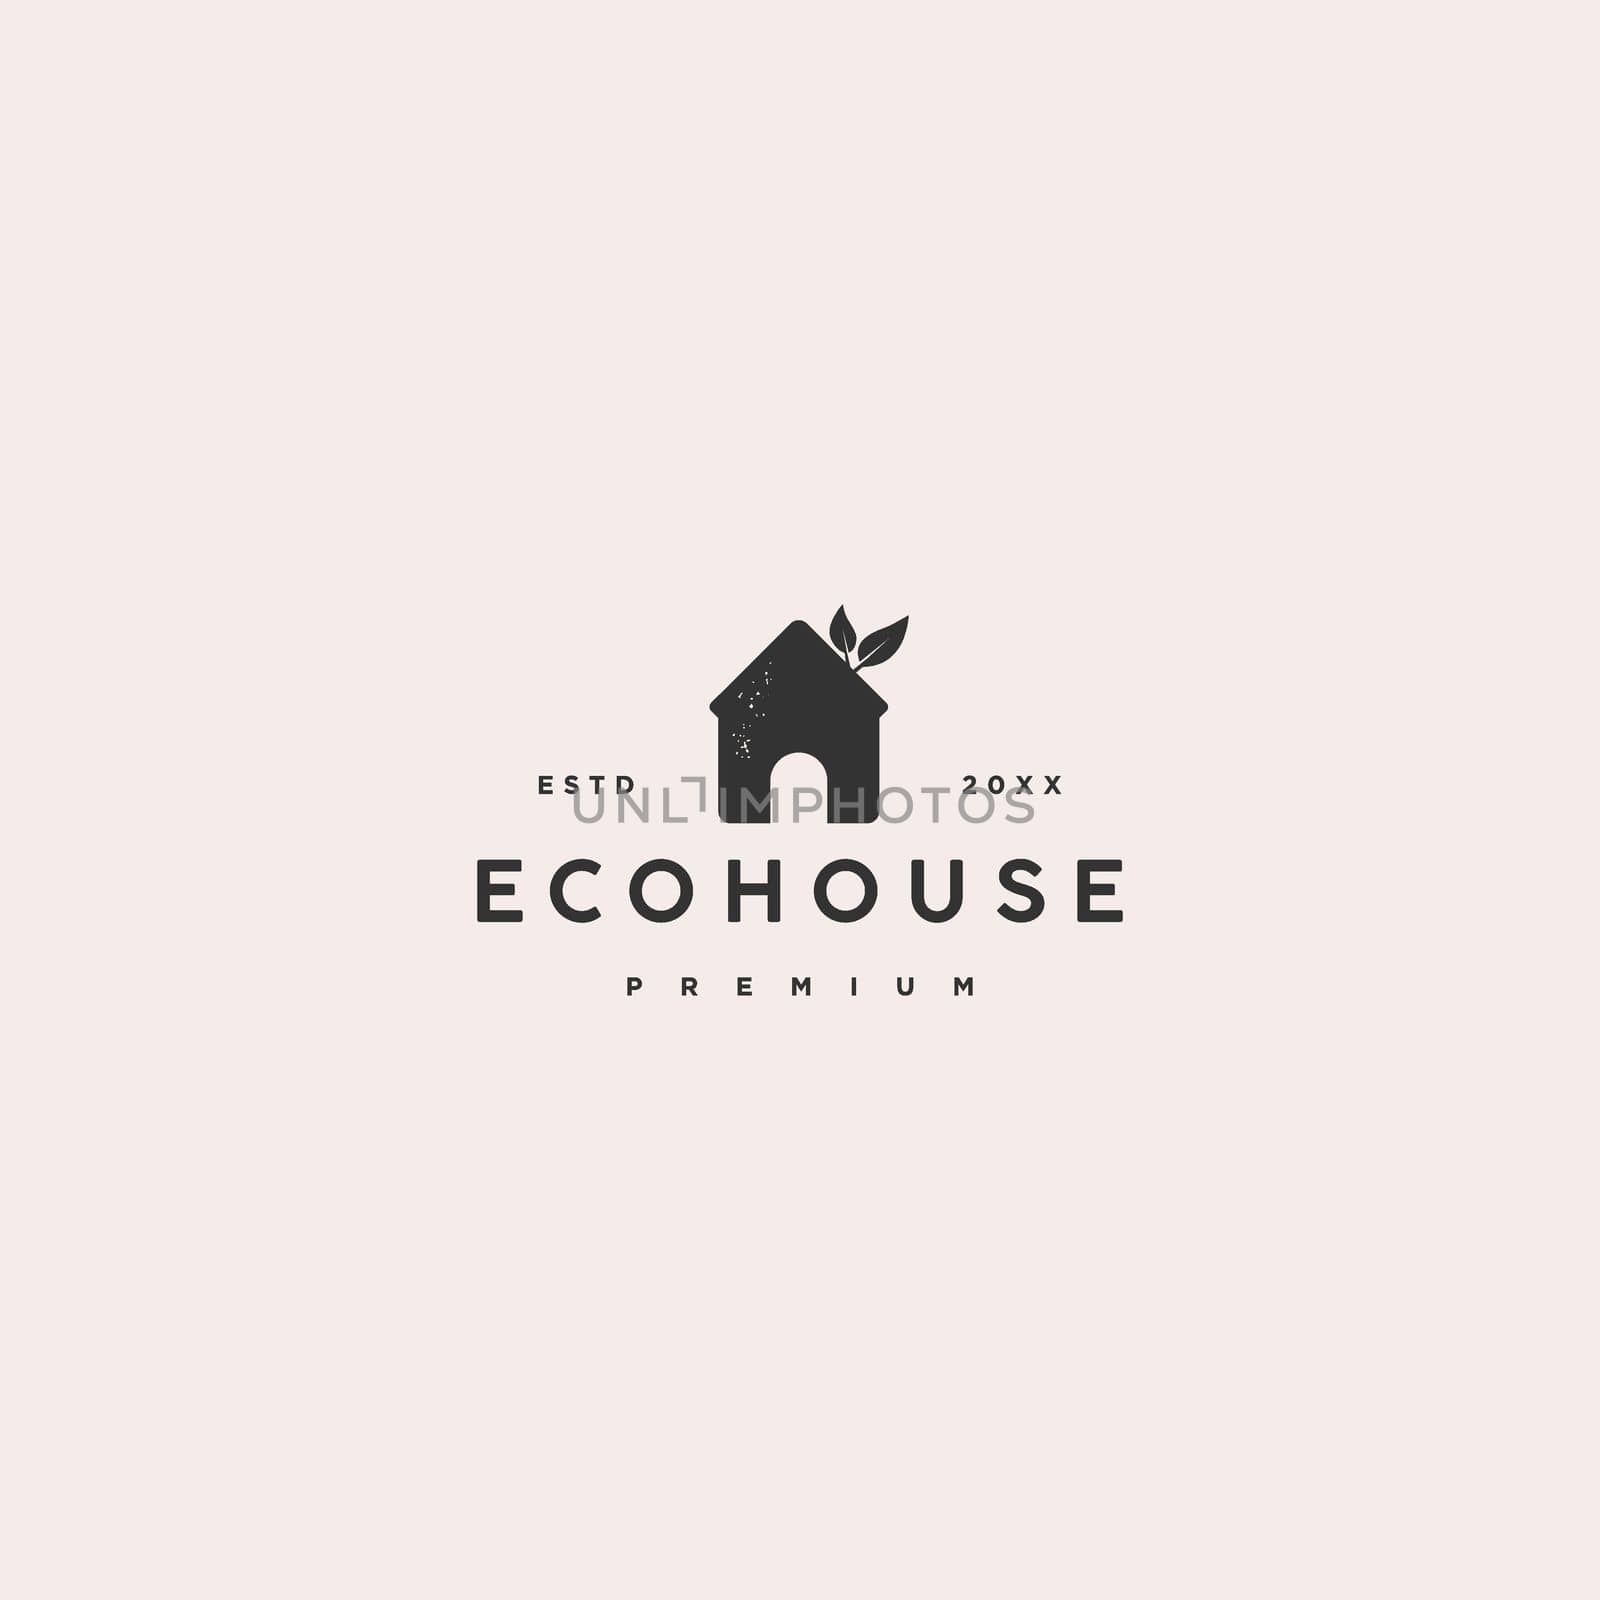 house with leaf logo. vintage hipster concept of nature home vector elements stock illustration by IreIru